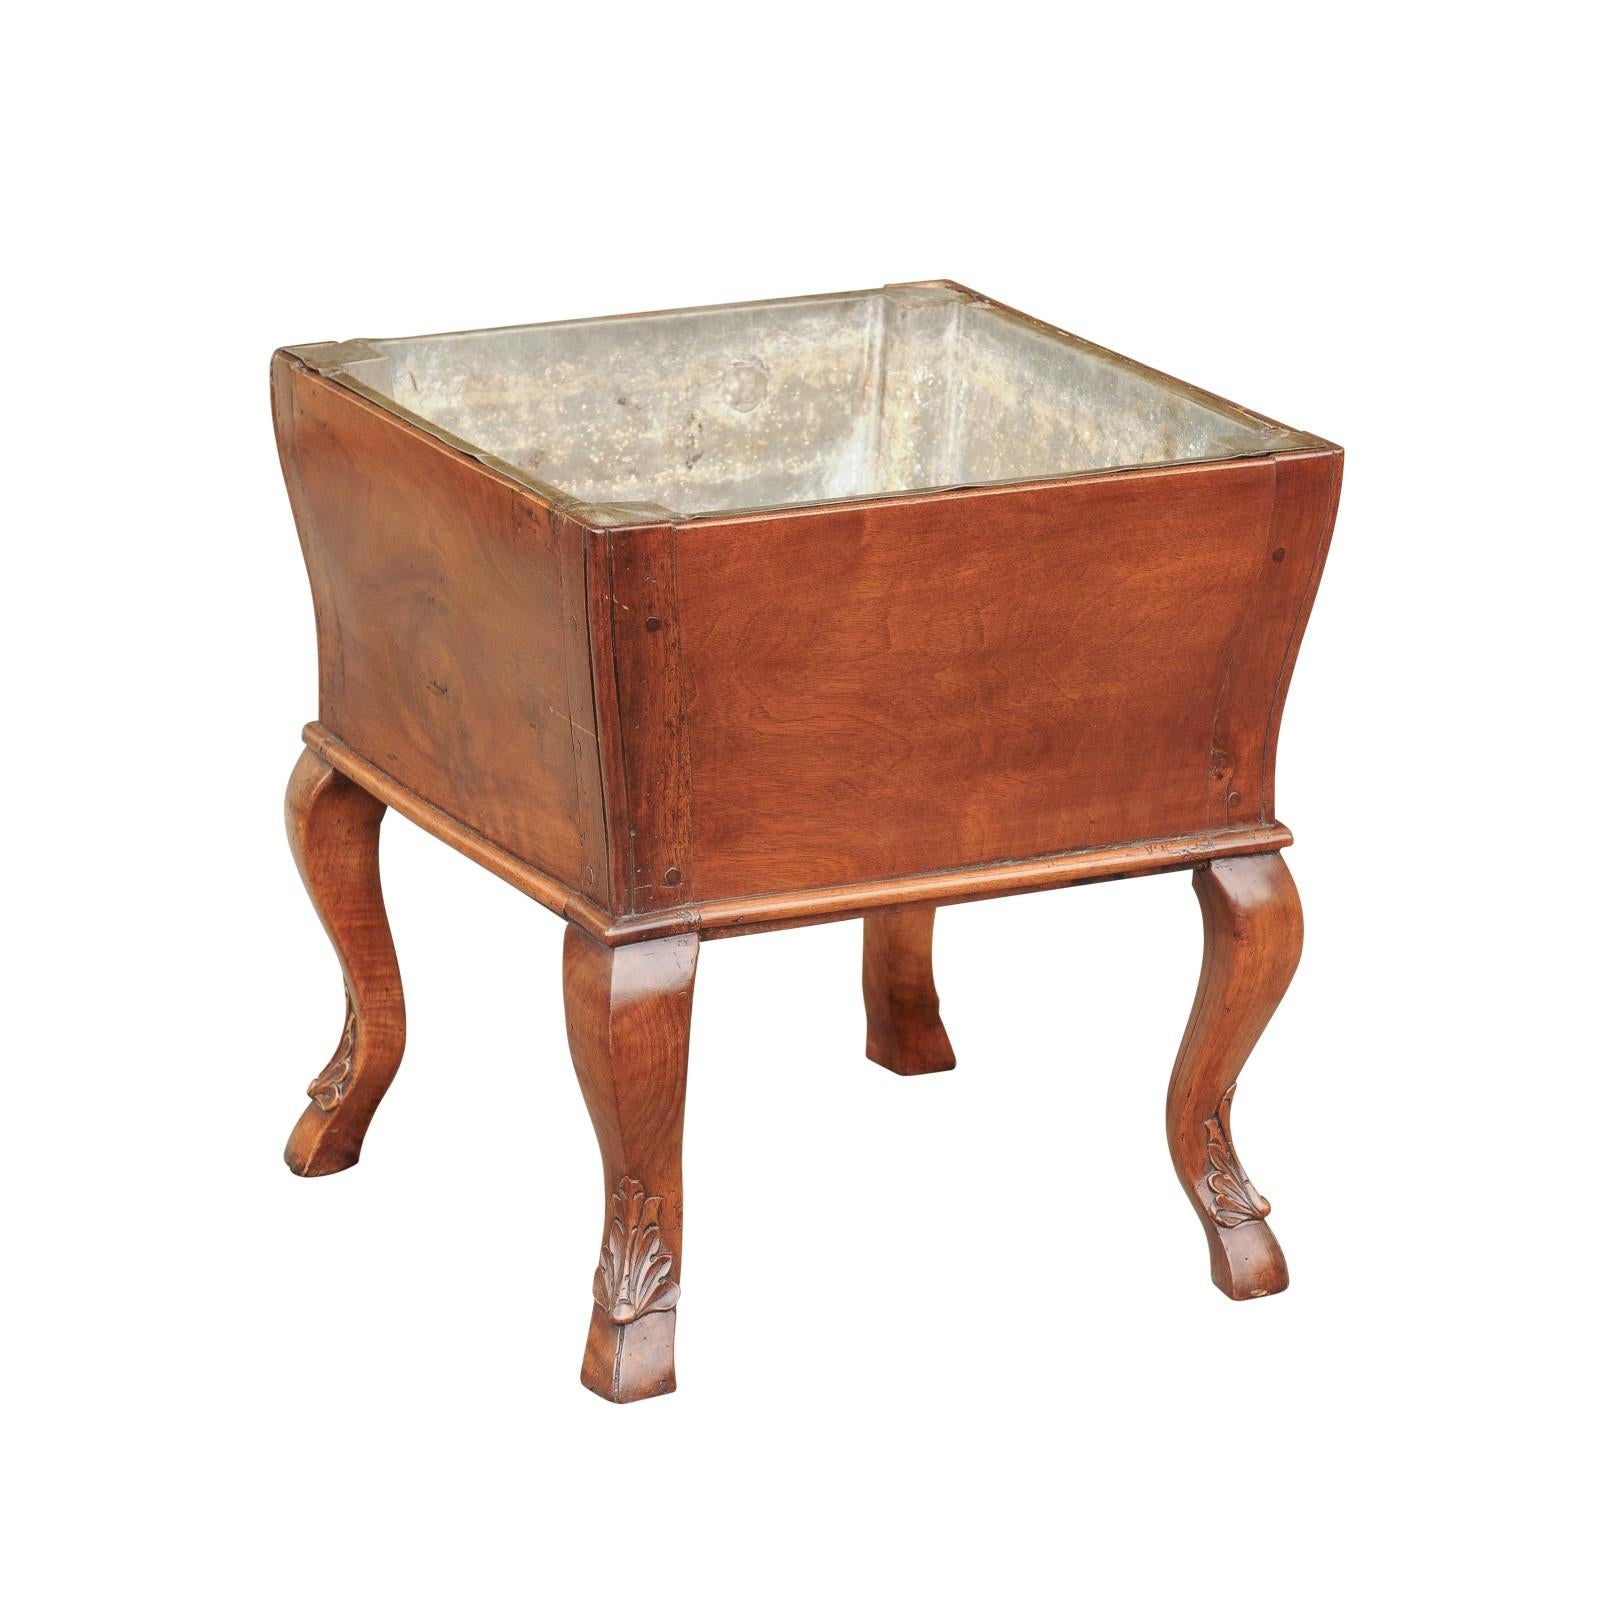 French Napoleon III Period Walnut Planter with Tin Interior and Cabriole Legs For Sale